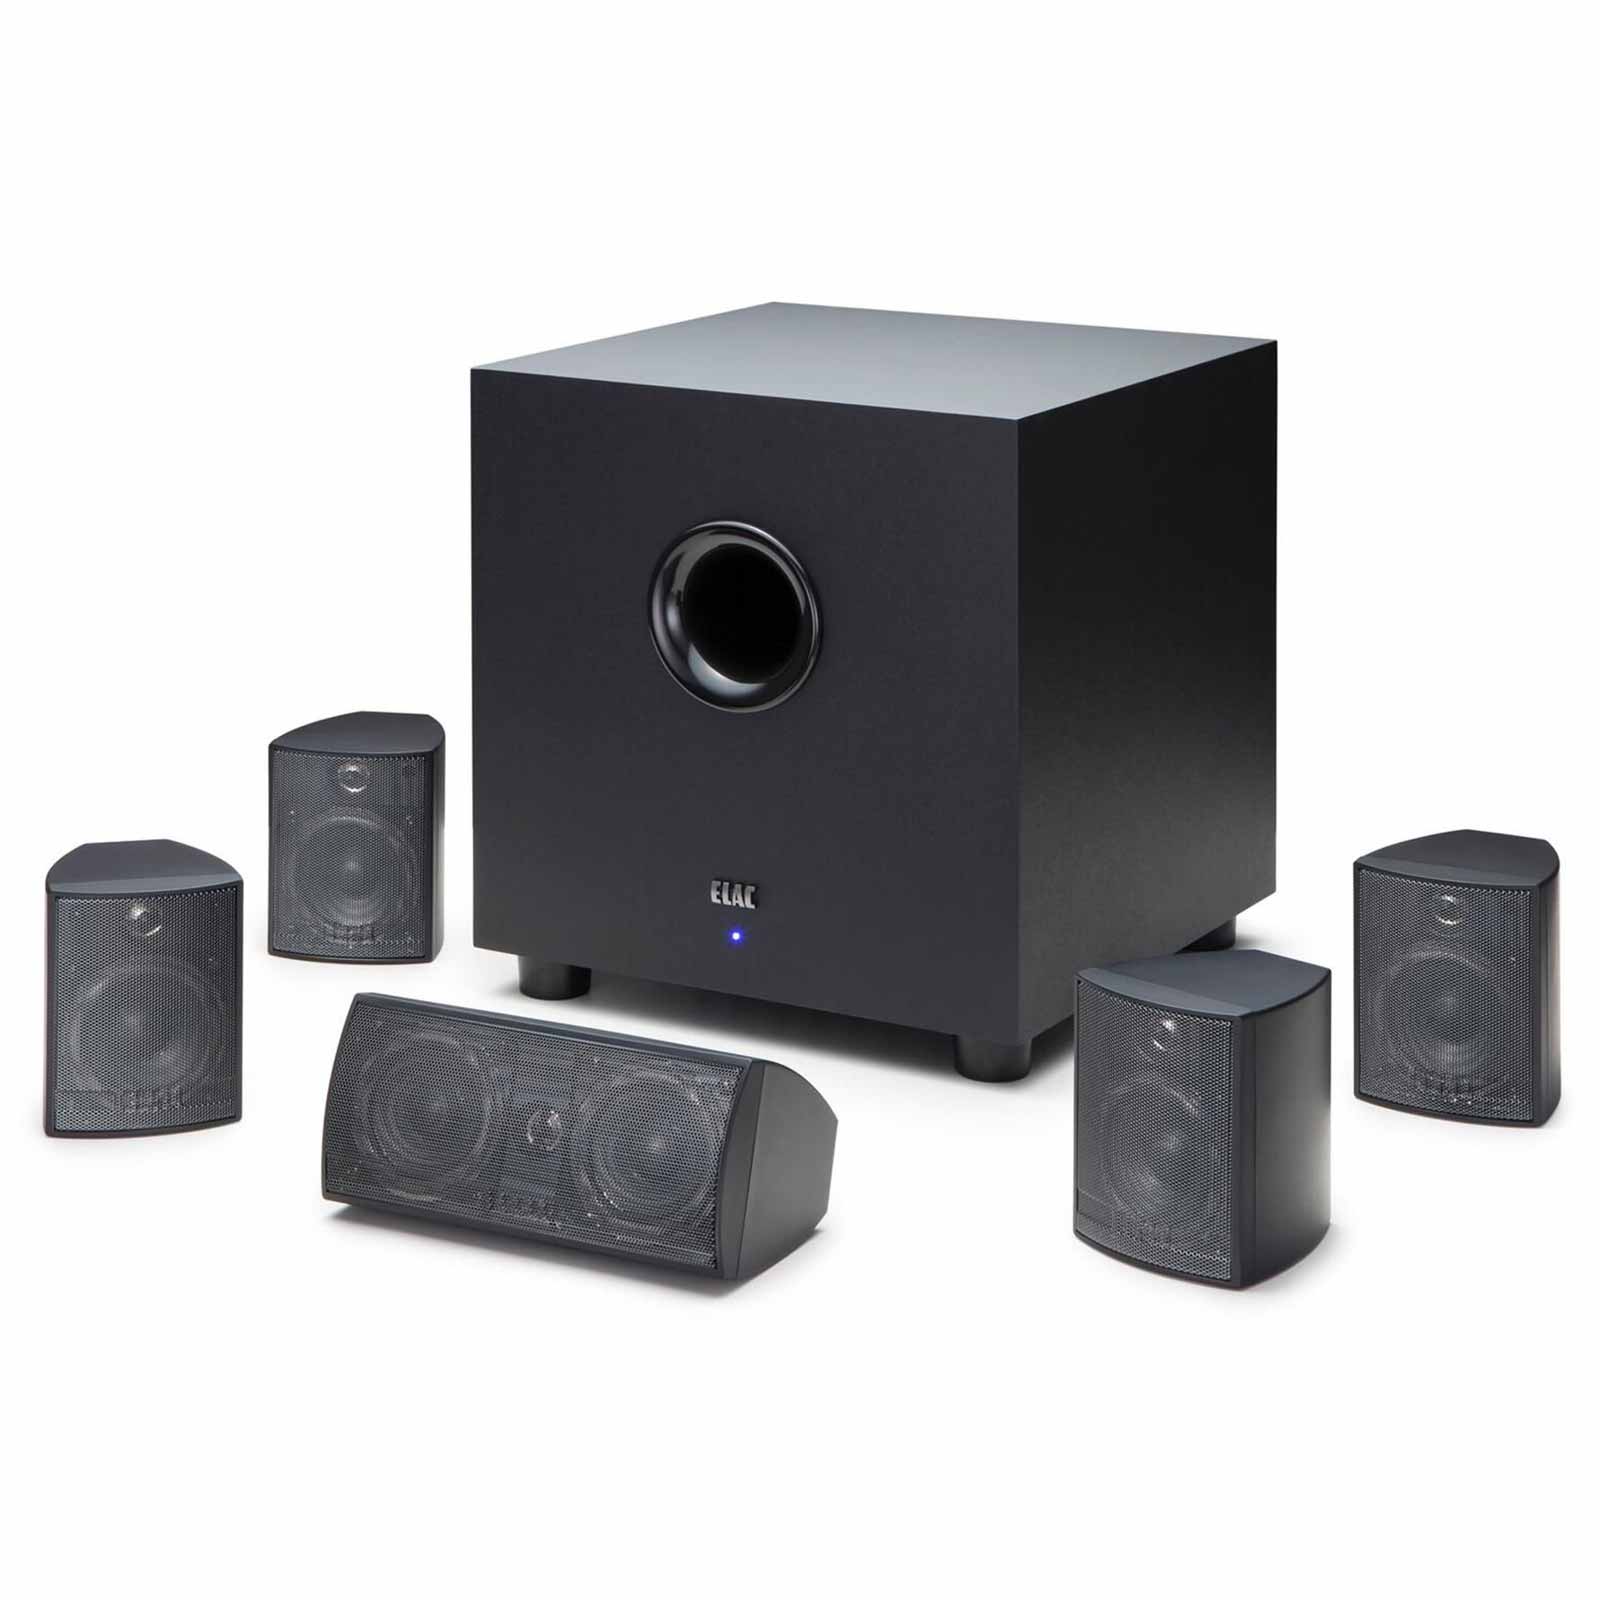 Bezwaar wol Respect Buy Elac Cinema 5 SET 5.1 Channel Home Theater Speakers at best price in  India